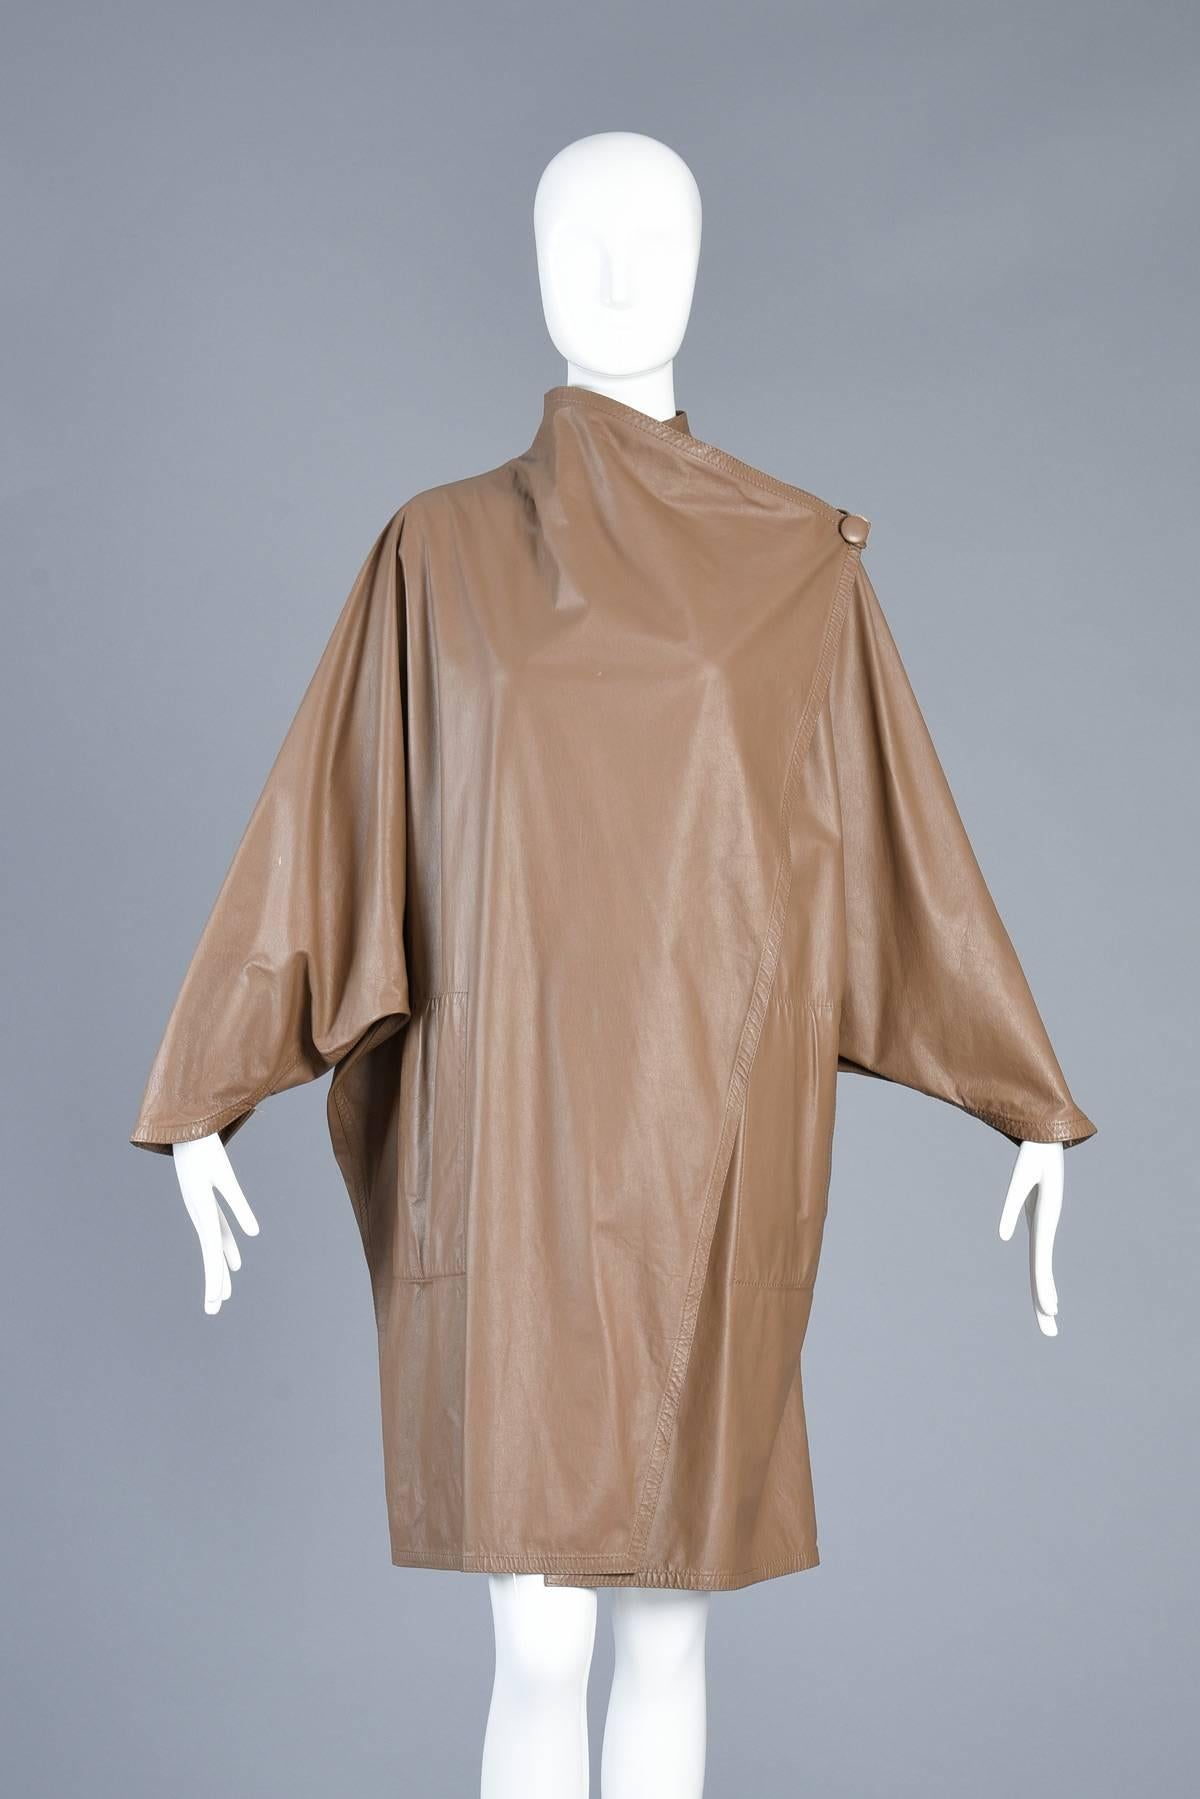 Incredible 1980s Reversible Suede Leather Avant Garde Draped Cape For Sale 4